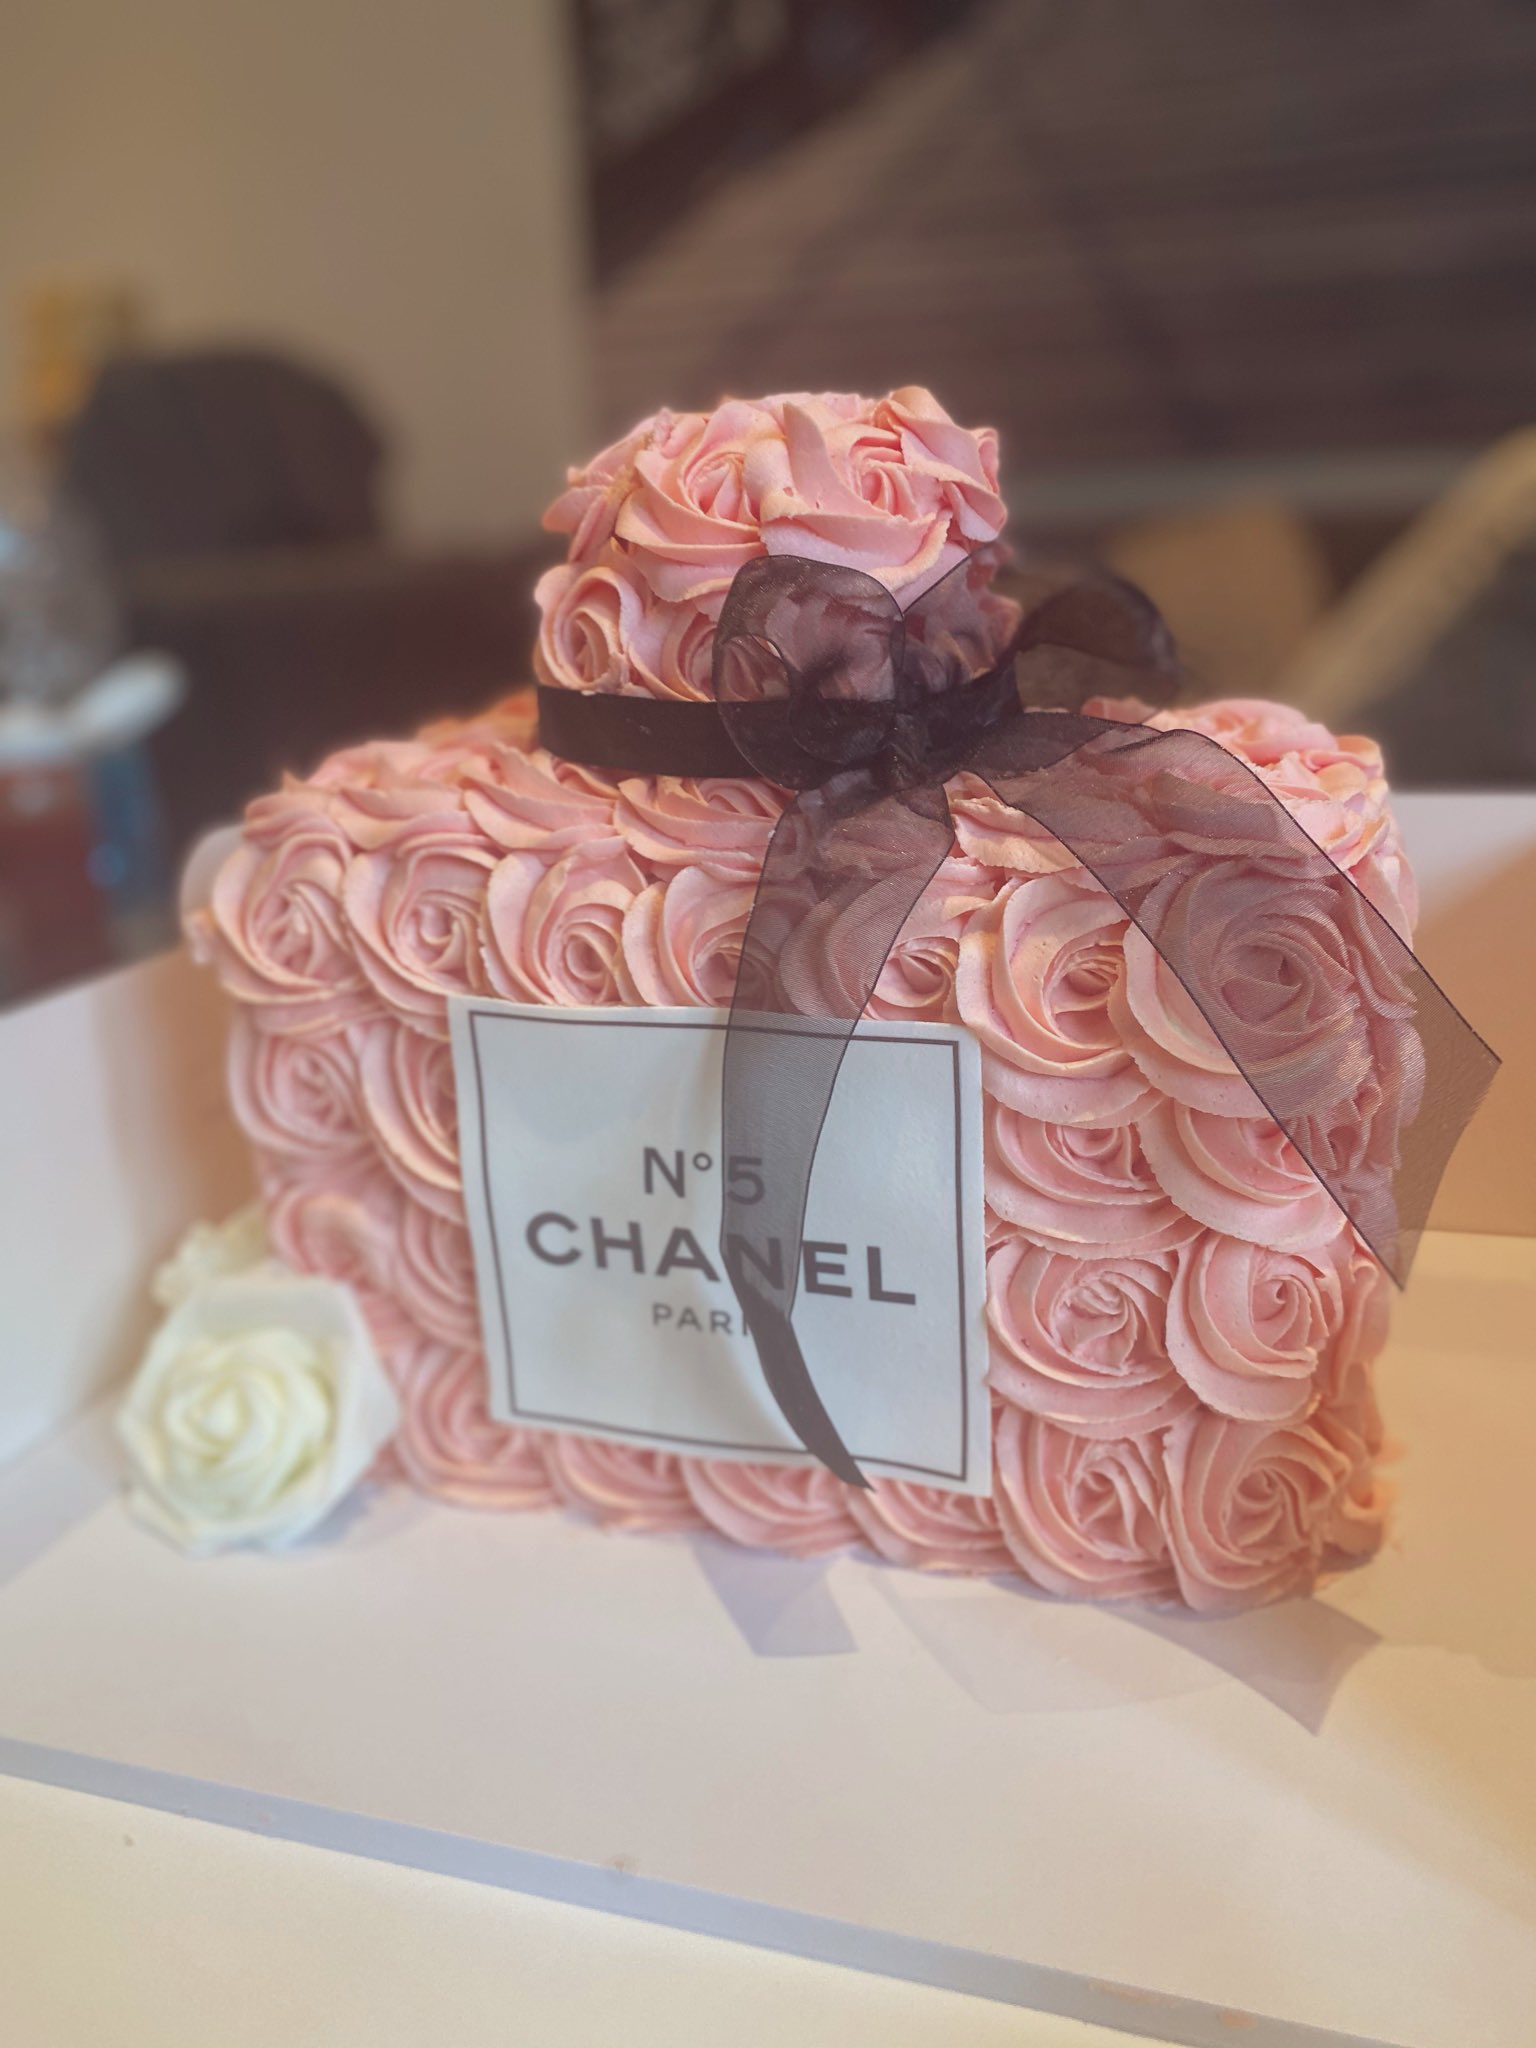 Quality at a StealChanel N5 - Body Lotion, pink and white chanel